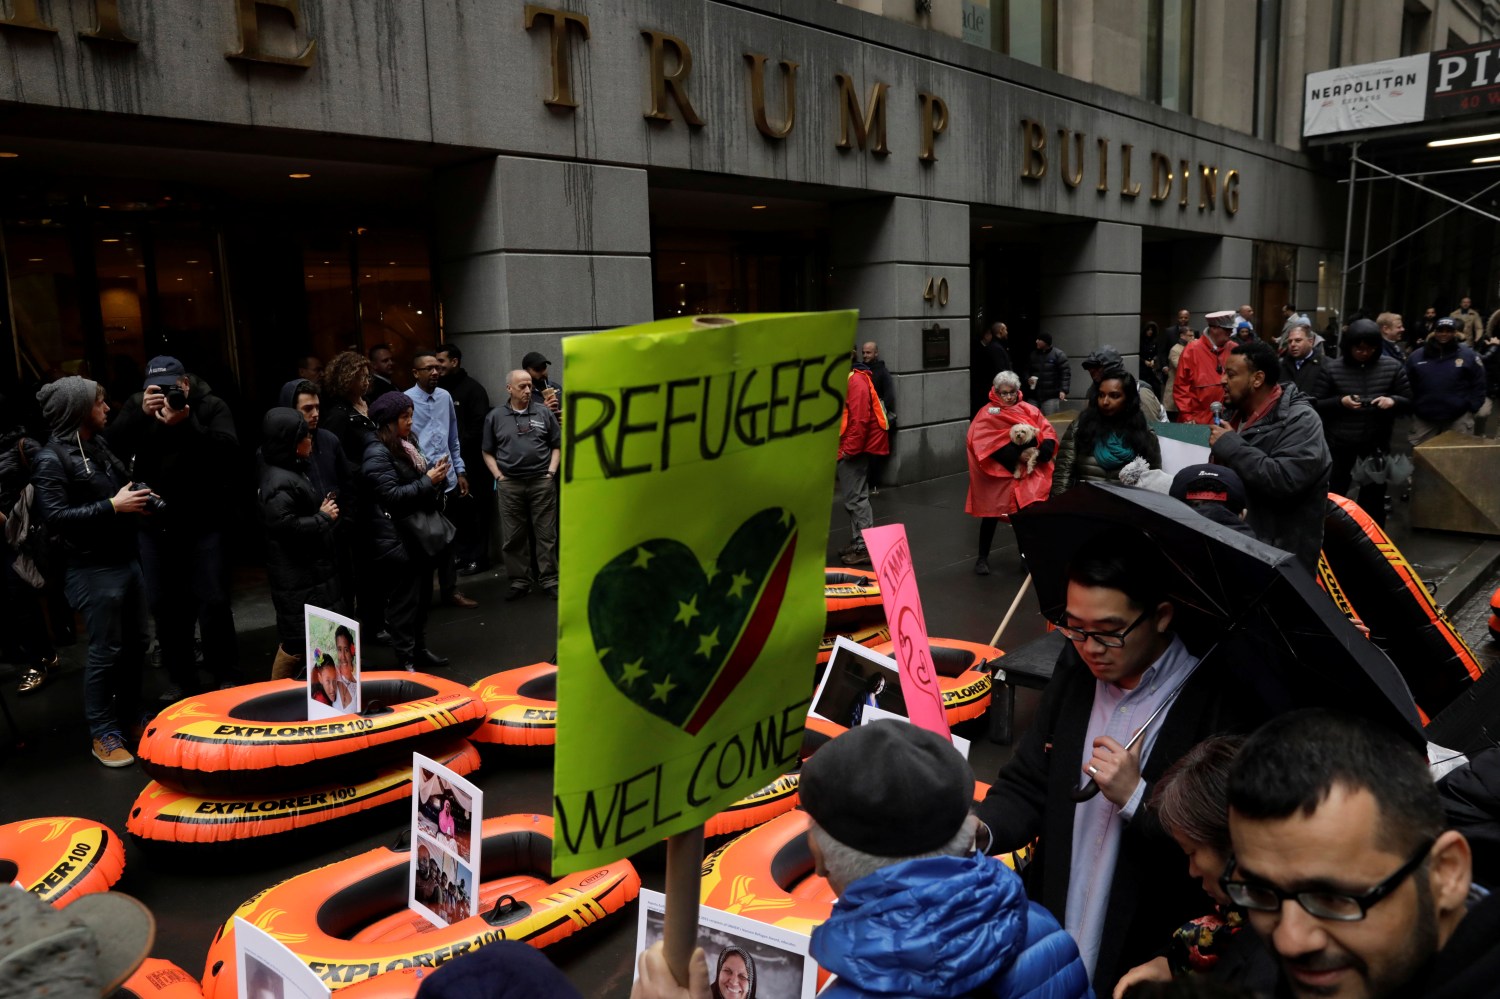 Protesters gather outside the Trump Building at 40 Wall St. to take action against Americas refugee ban in New York City, U.S., March 28, 2017. REUTERS/Lucas Jackson - RTX333GZ